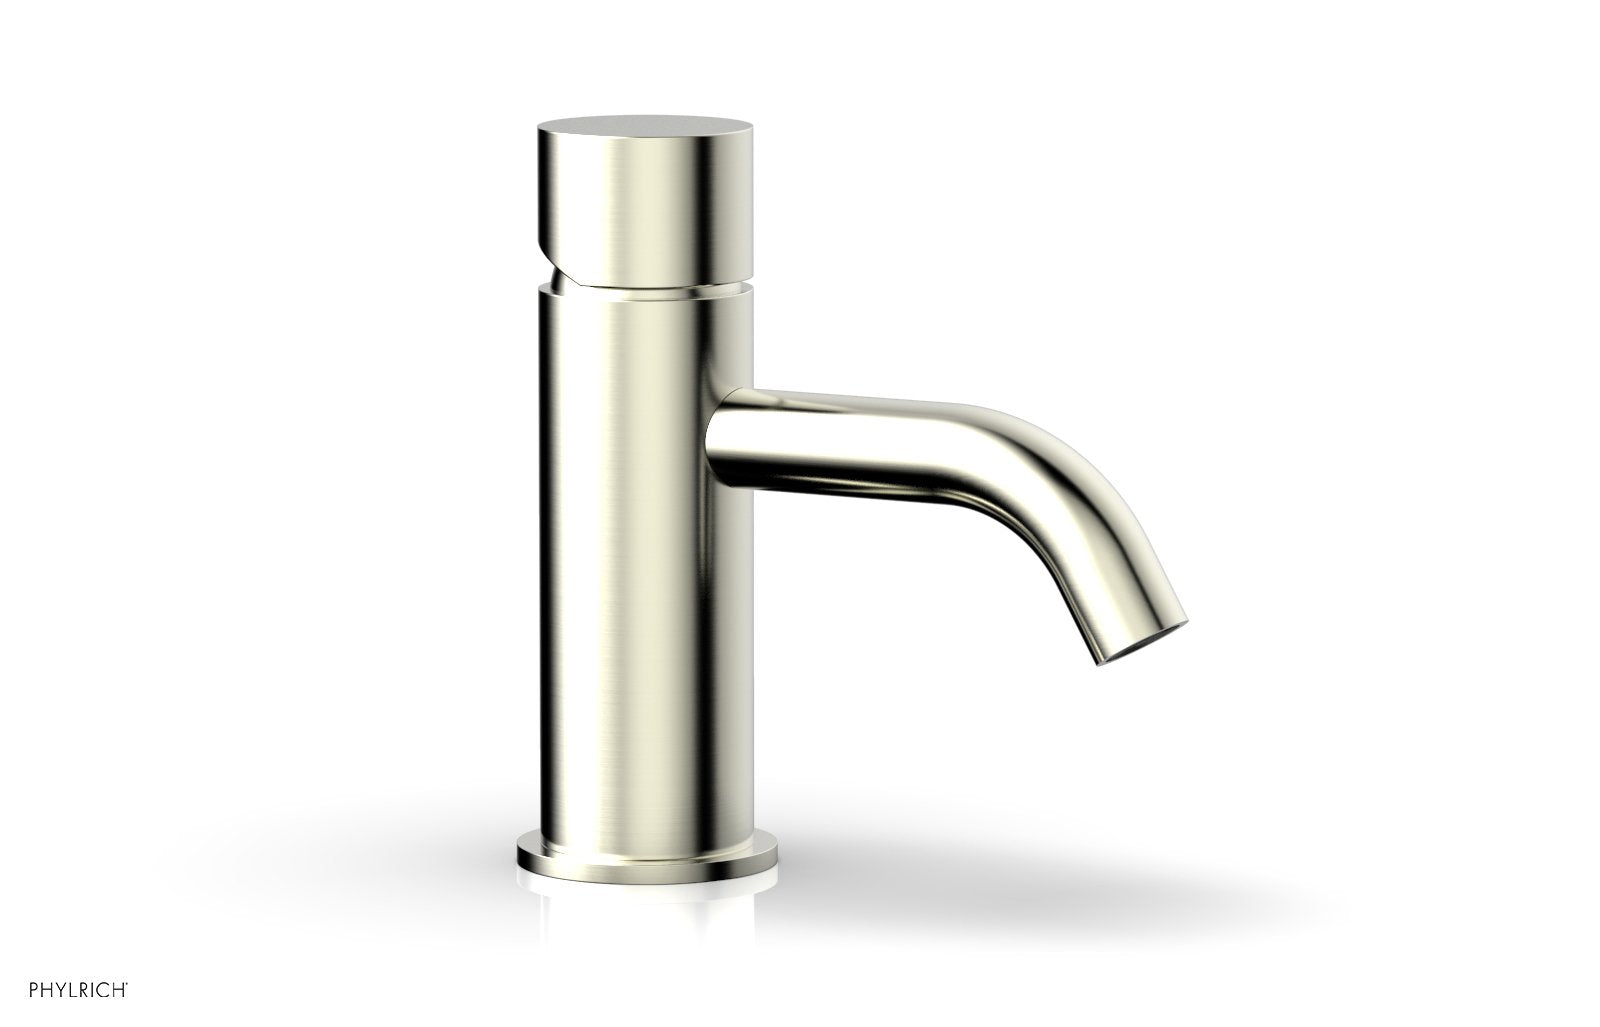 Phylrich BASIC II Single Hole Lavatory Faucet, Smooth Handle